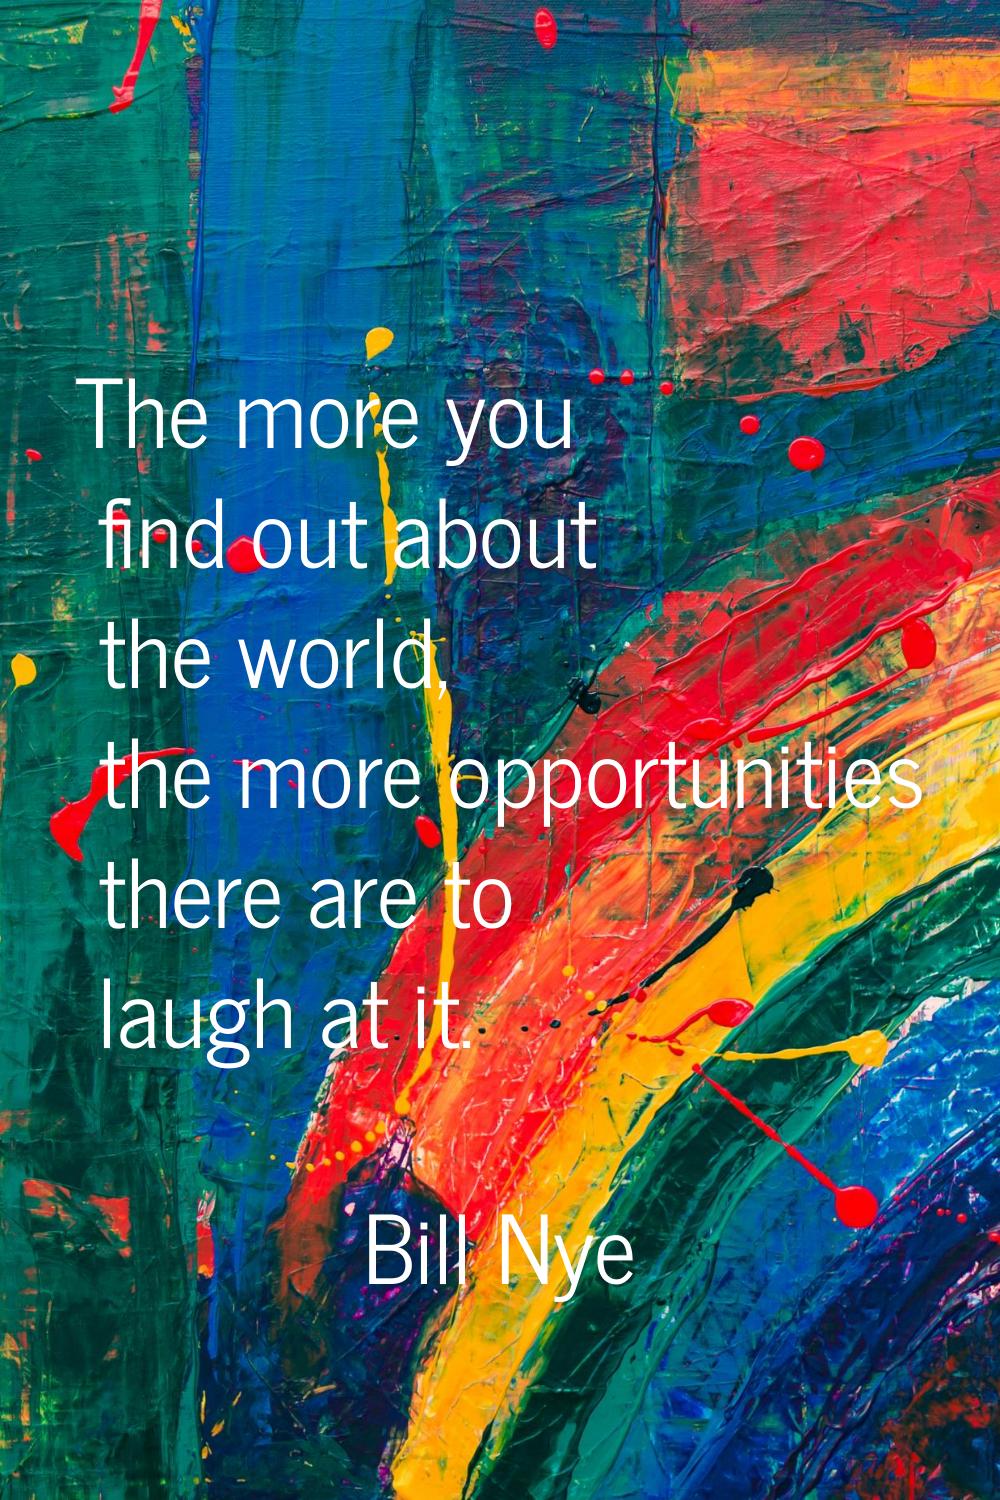 The more you find out about the world, the more opportunities there are to laugh at it.